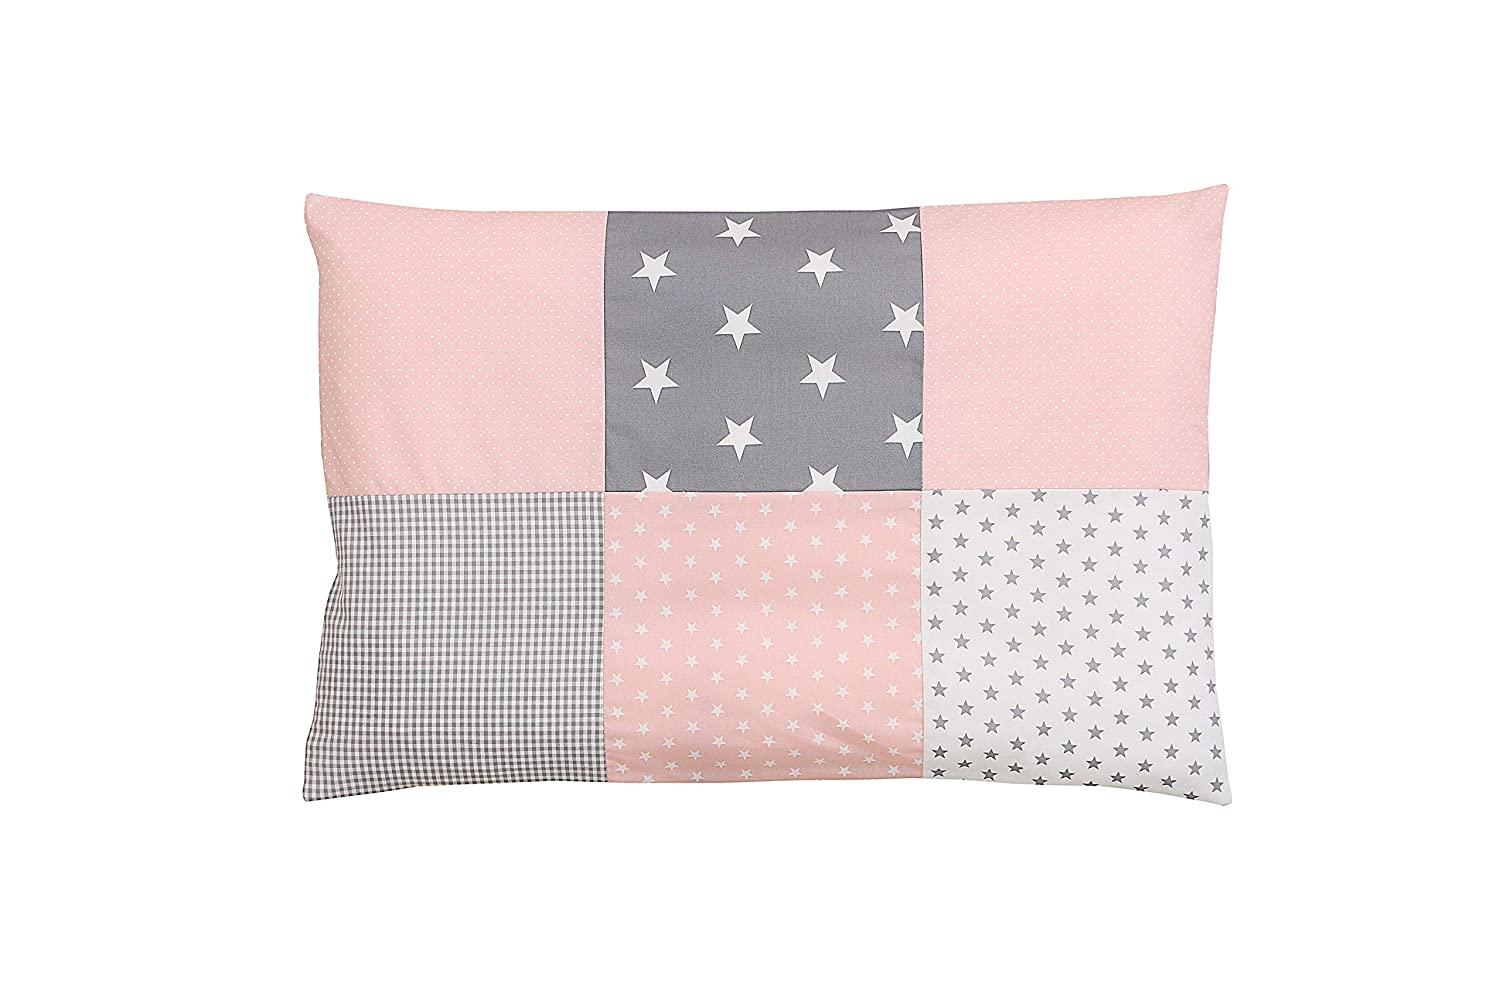 ULLENBOOM ® Cushion Cover 40 x 60 cm Children and Baby Pink Grey (Made in EU) - Cotton Pillow Case with Zip Closure Cover Also Suitable for Decorative Cushions with Stars Motif Patchwork Design